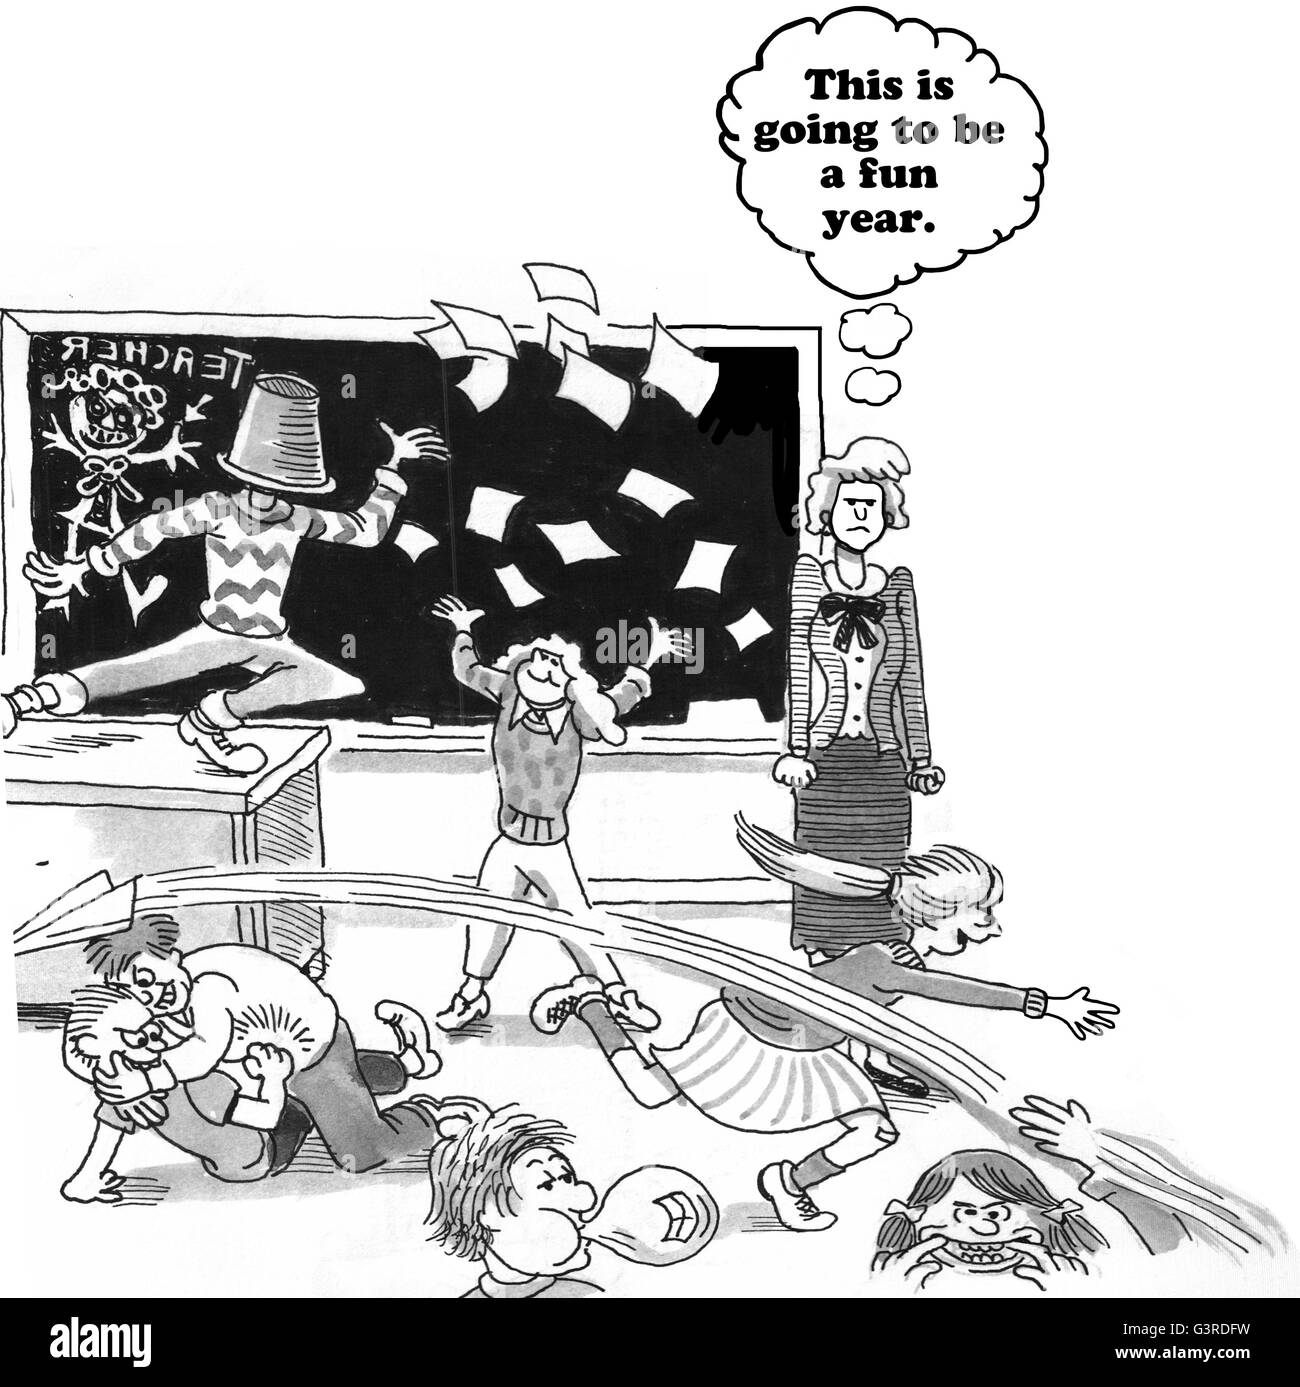 Education cartoon about a chaotic classroom. Stock Photo